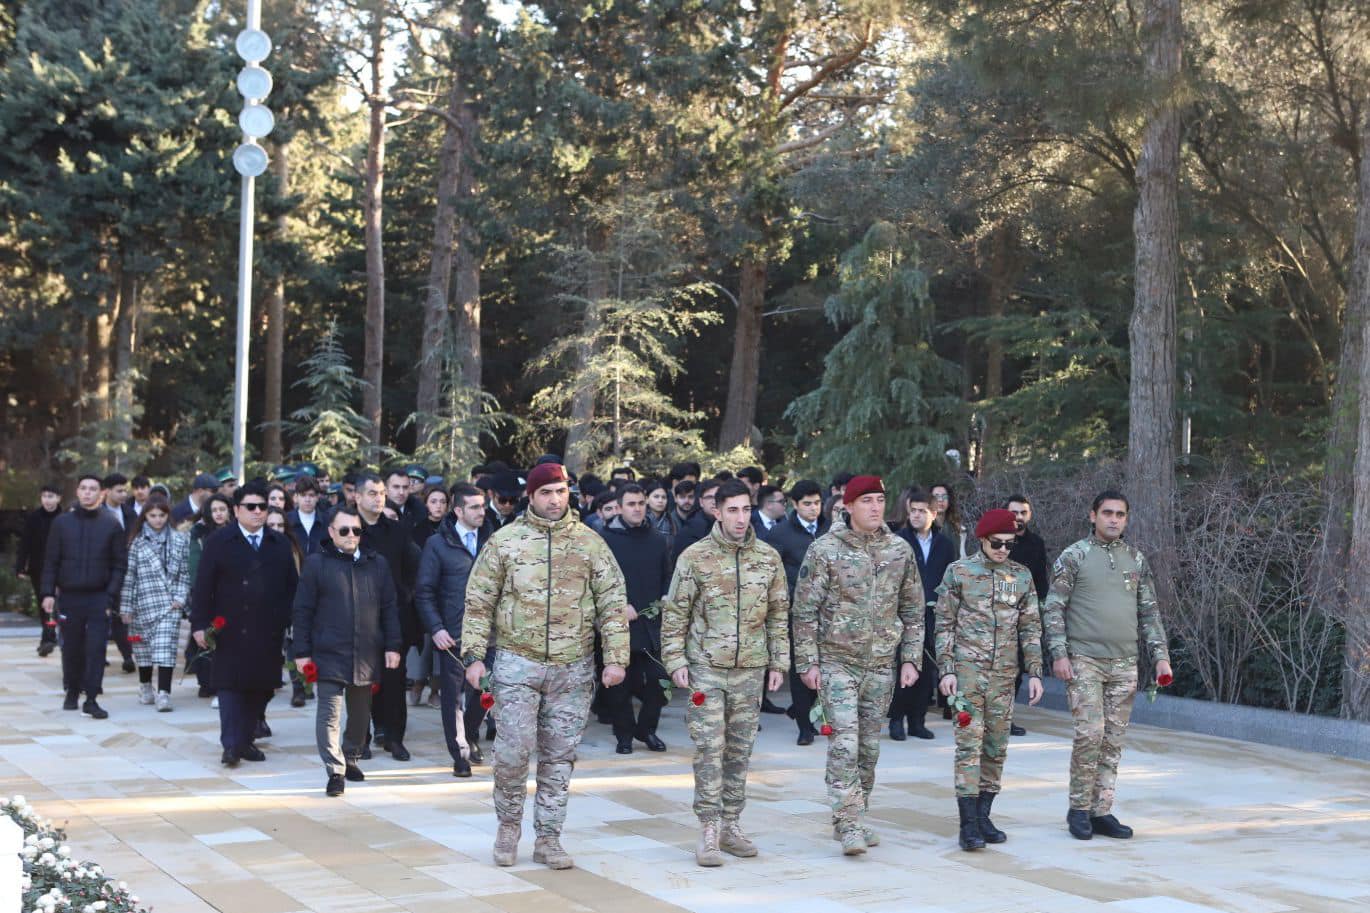 Youth organizations honored the memory of the martyrs of January 20